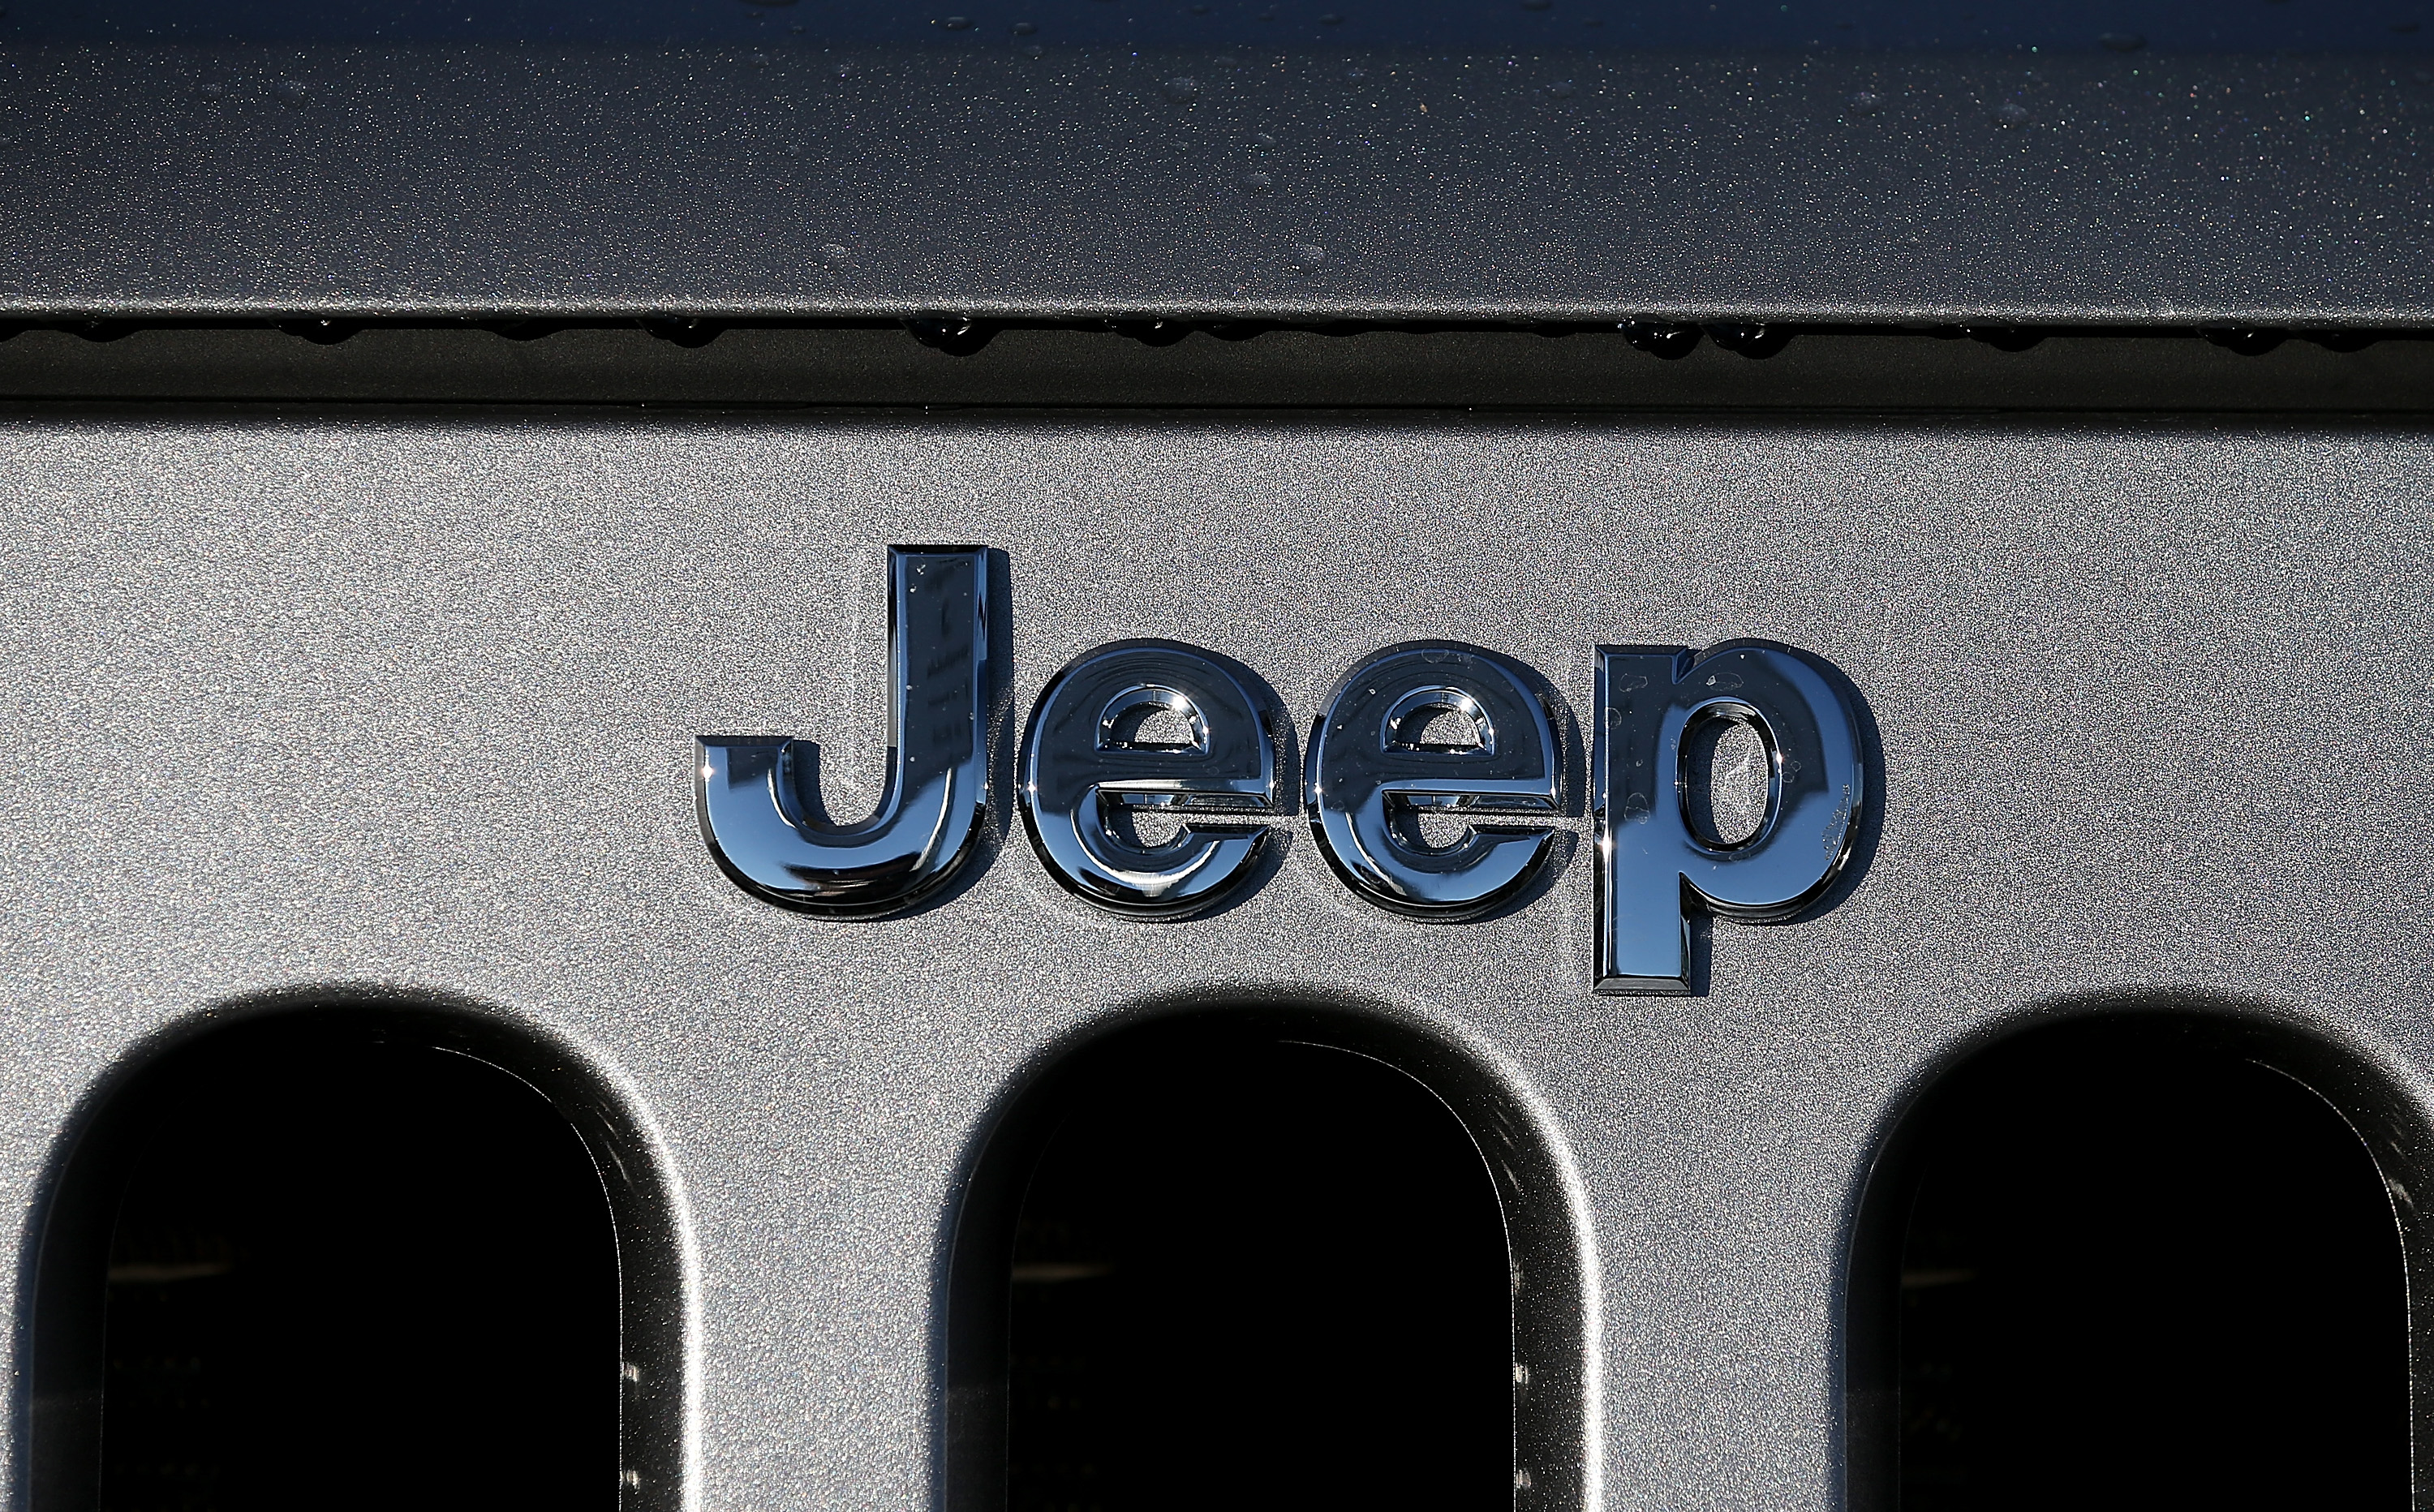 Jeep has pulled out of the Chicago Auto Show